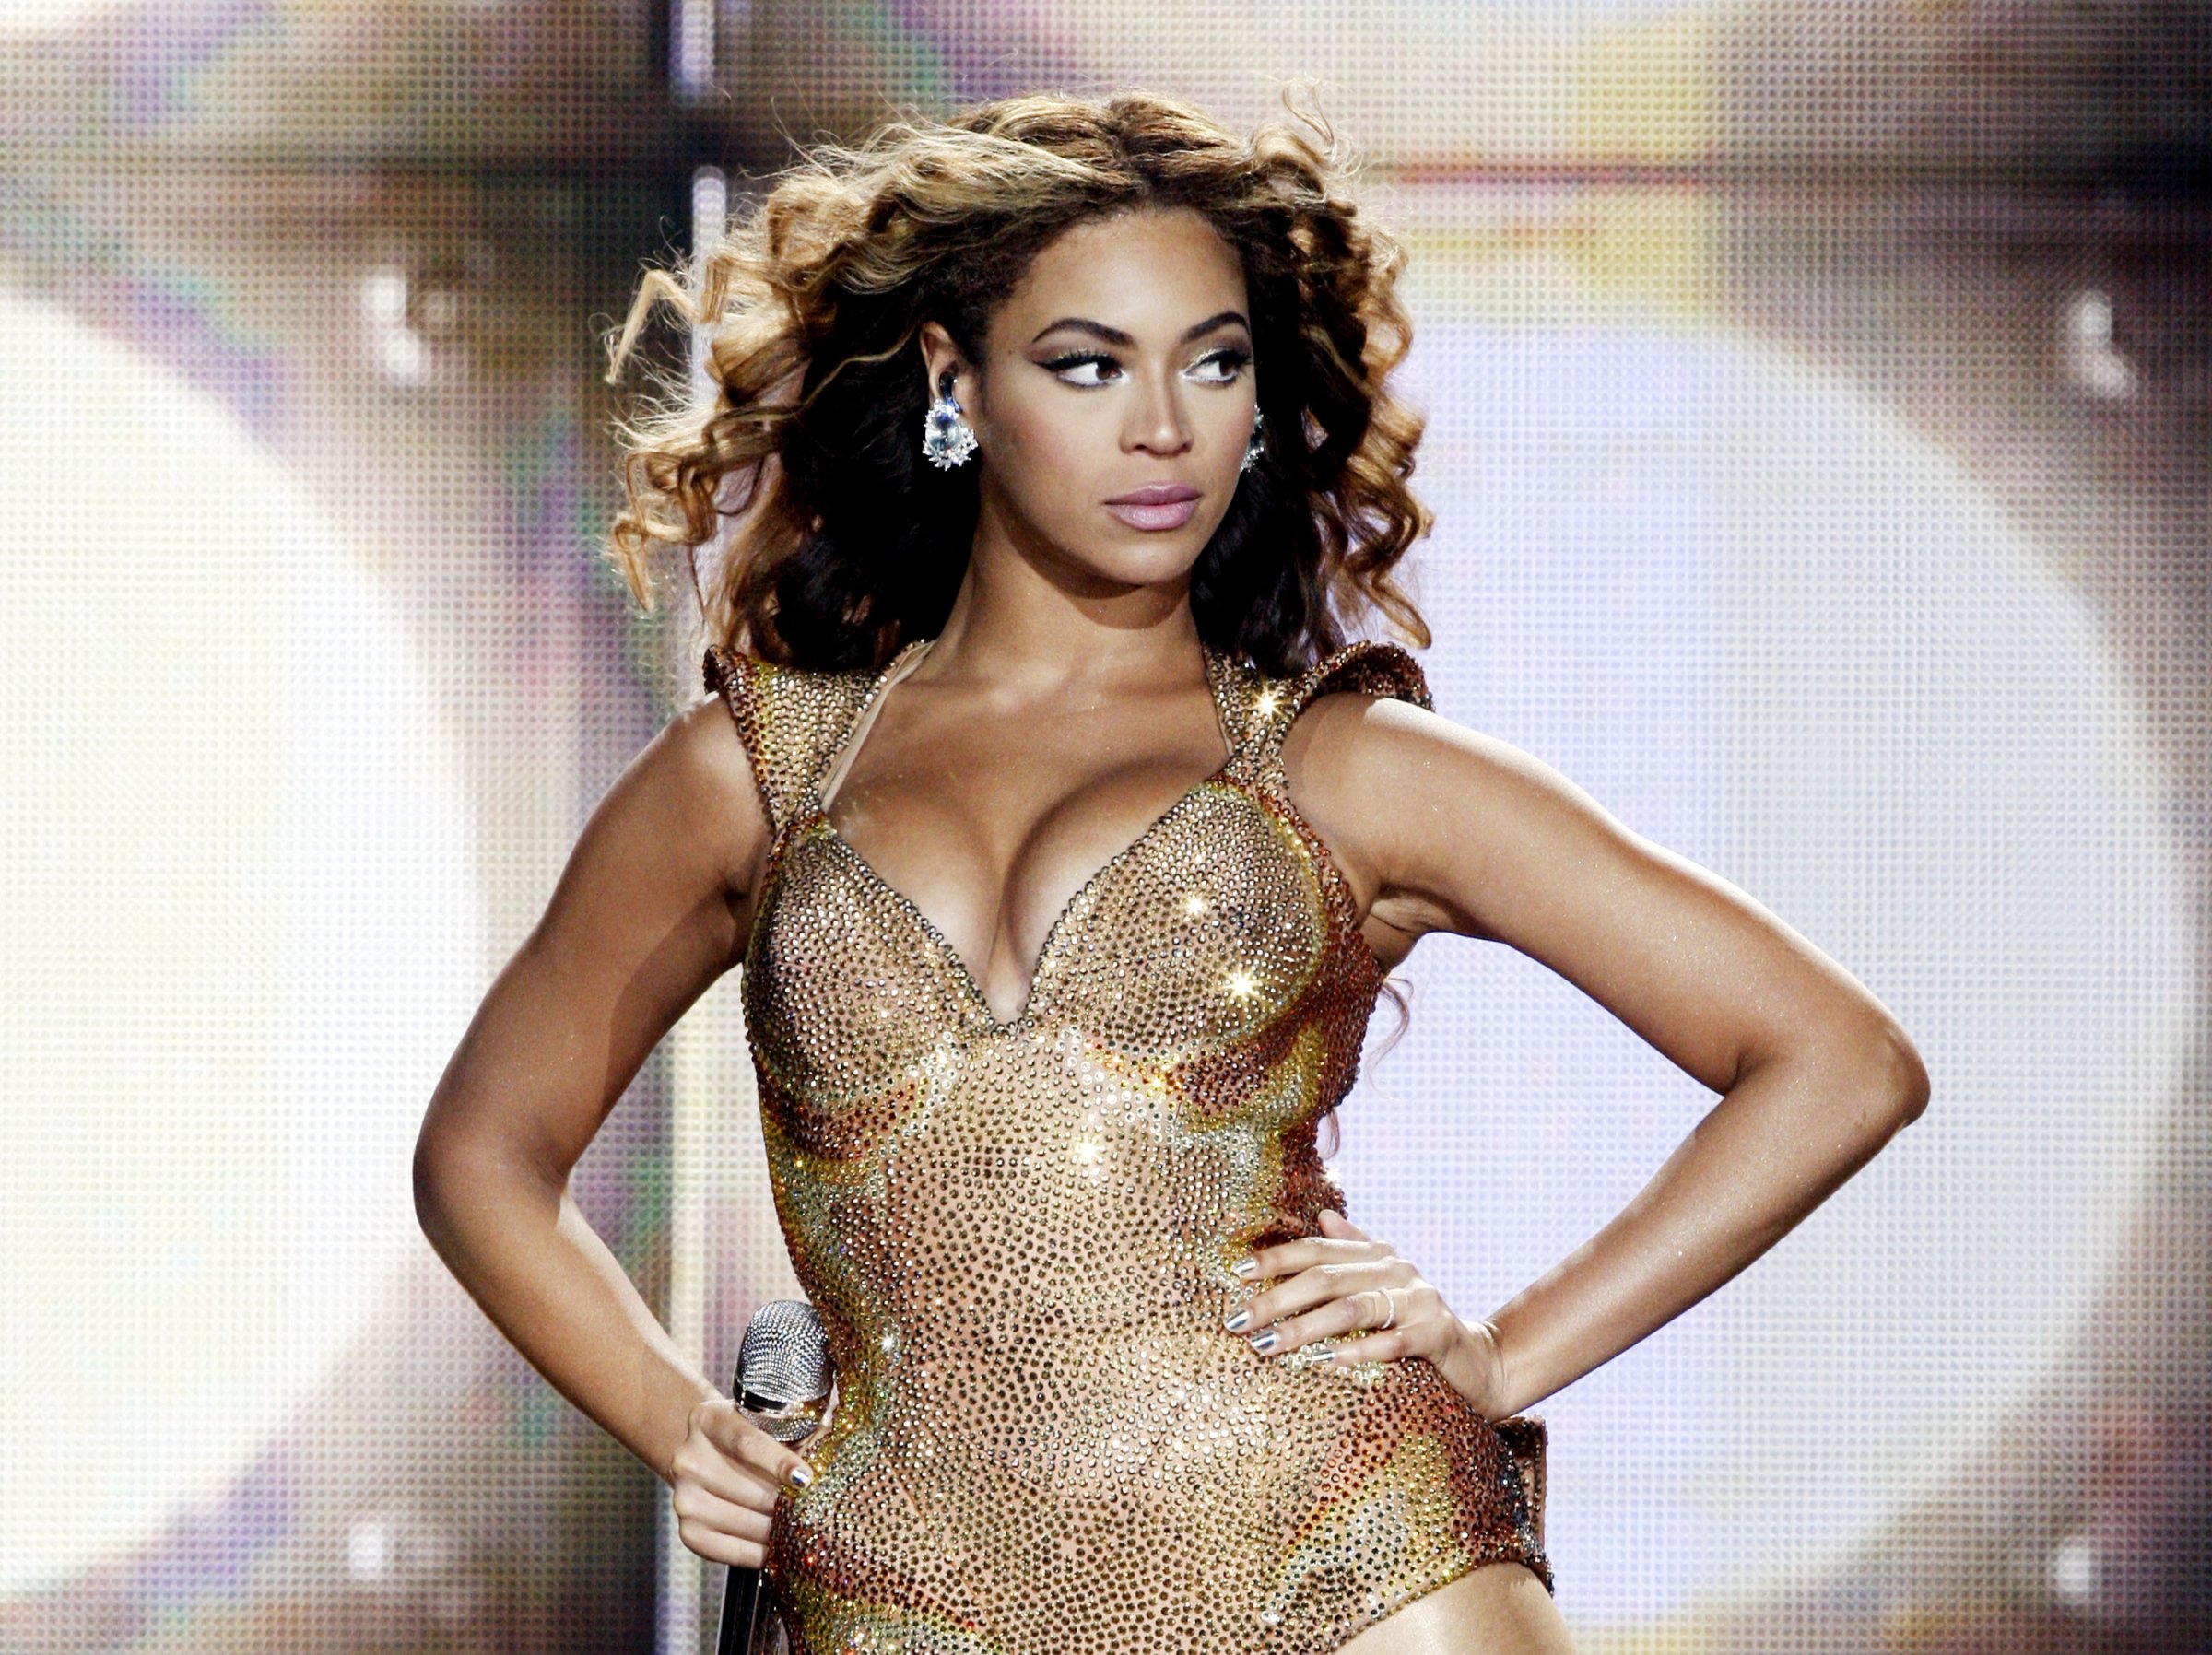 Beyonce performs at the Staples Center on July 13, 2009 in Los Angeles, California.